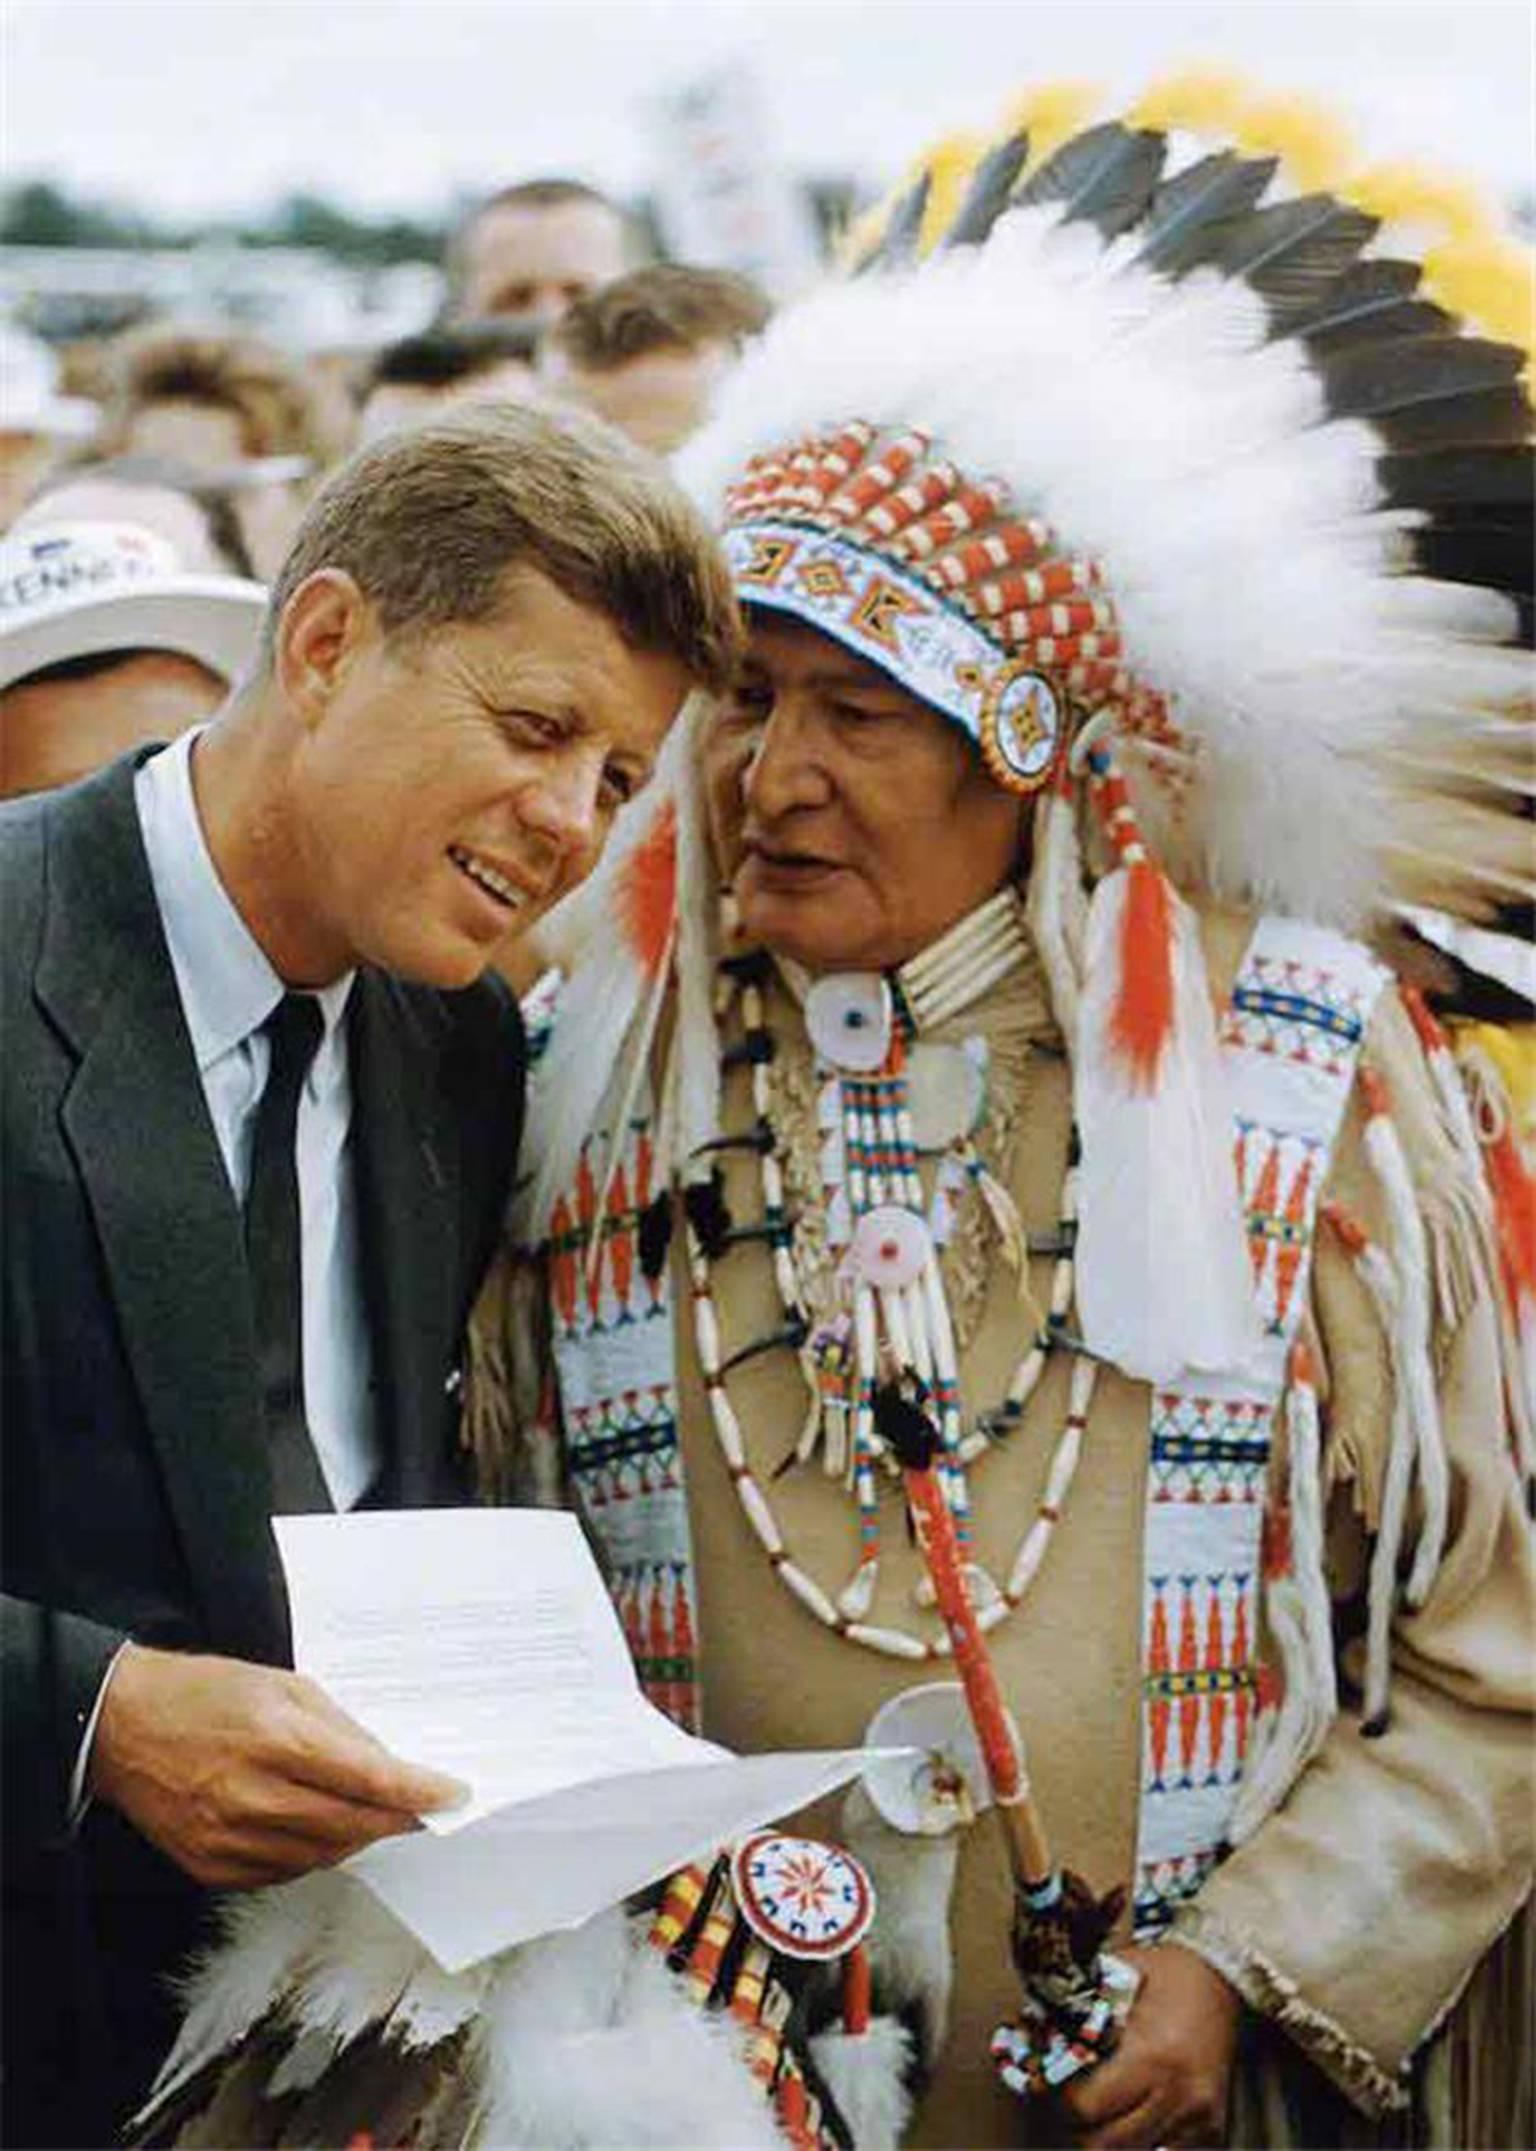 Art Shay Color Photograph - Two Chiefs - John F. Kennedy Fields Indian Request, 1960